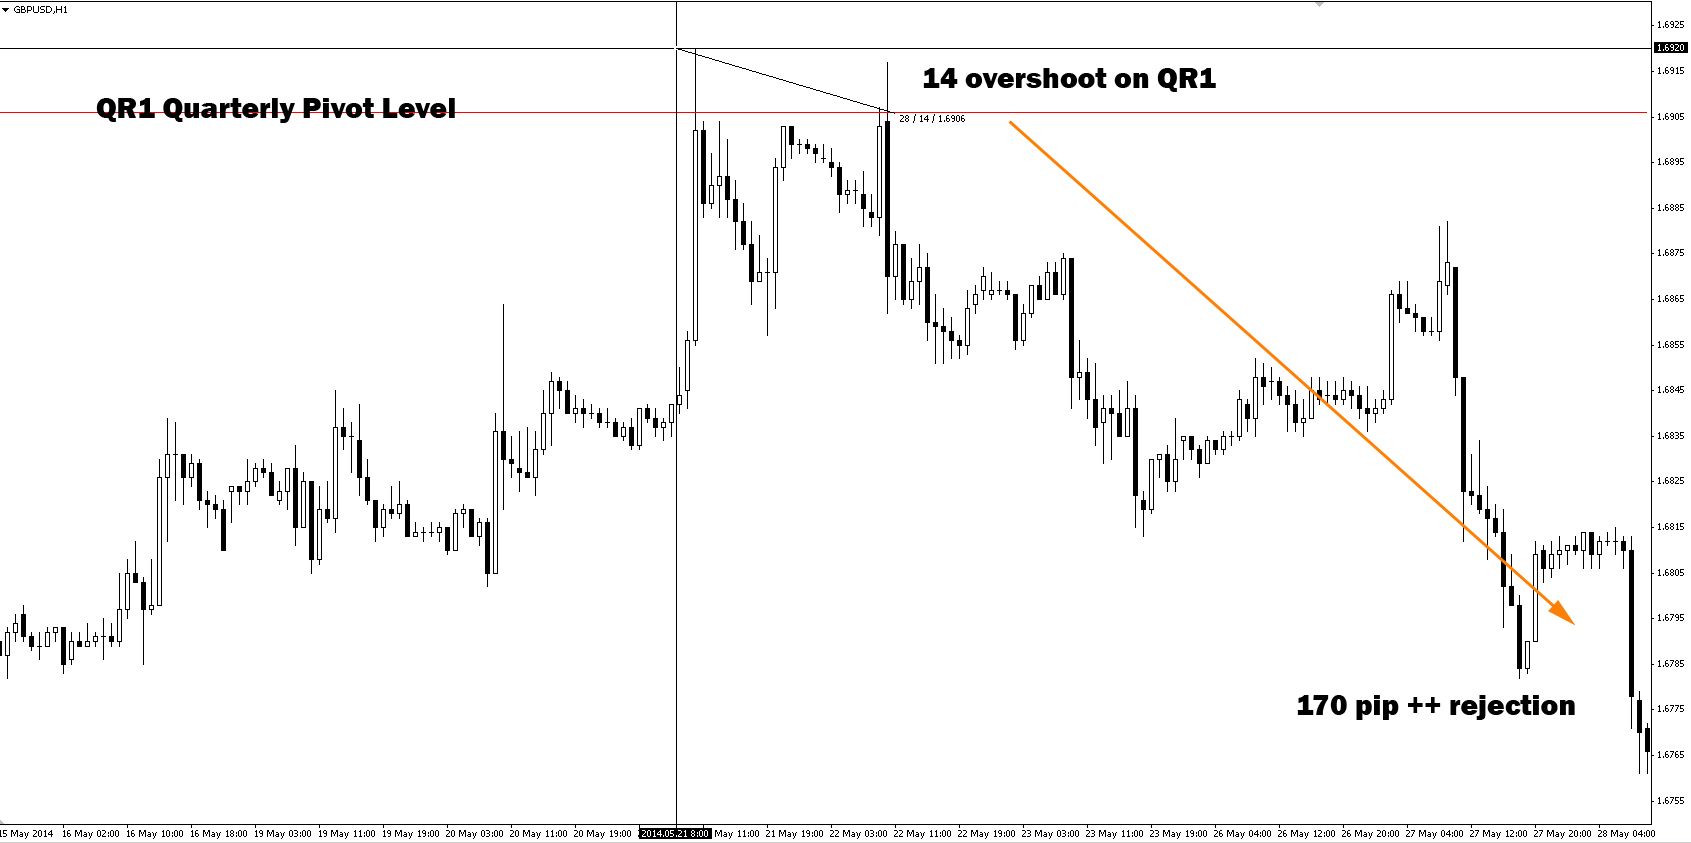 GBPUSD - 21/05/14 - 28/05/14 - 170 pip + rejection from QR1